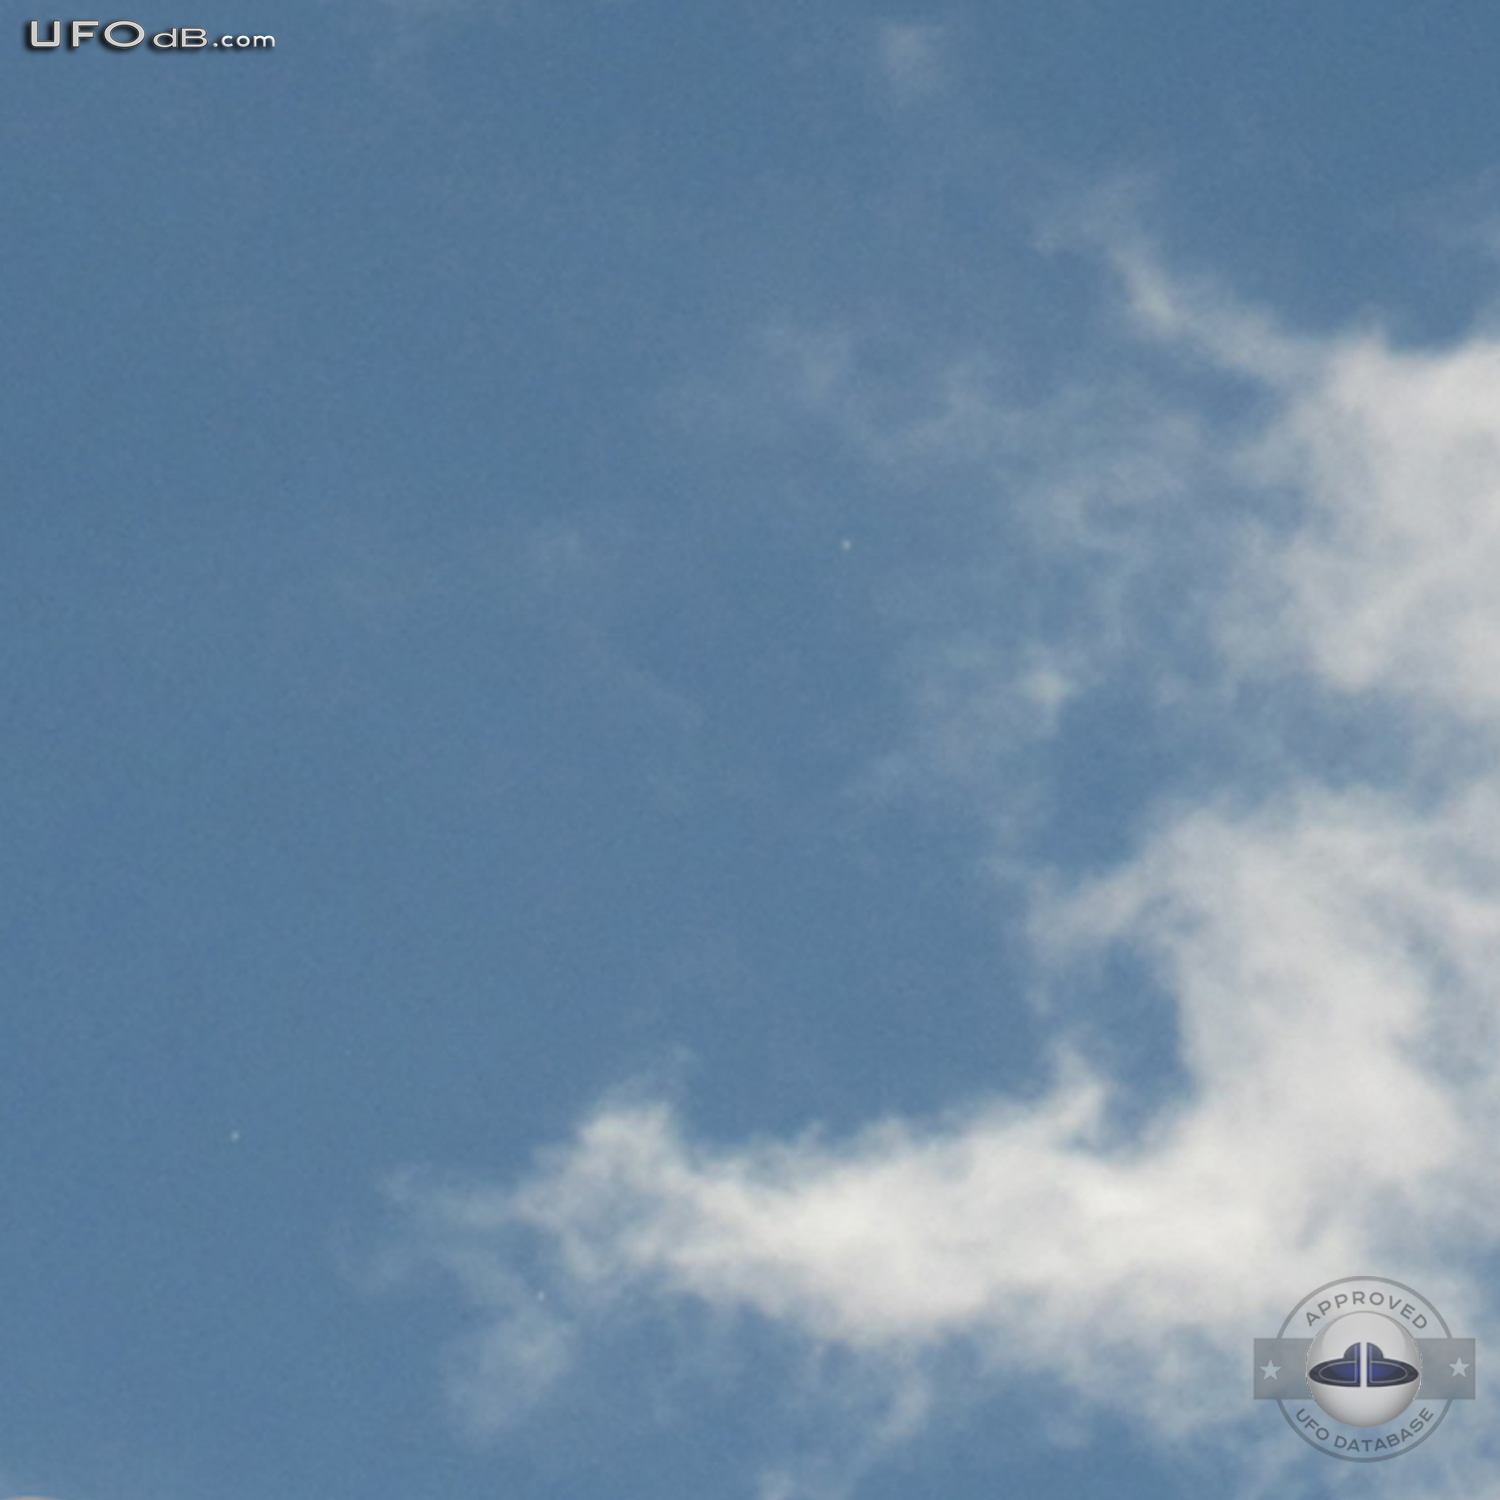 White disc UFOs hides behind clouds Davao Philippines November 3 2010 UFO Picture #340-3